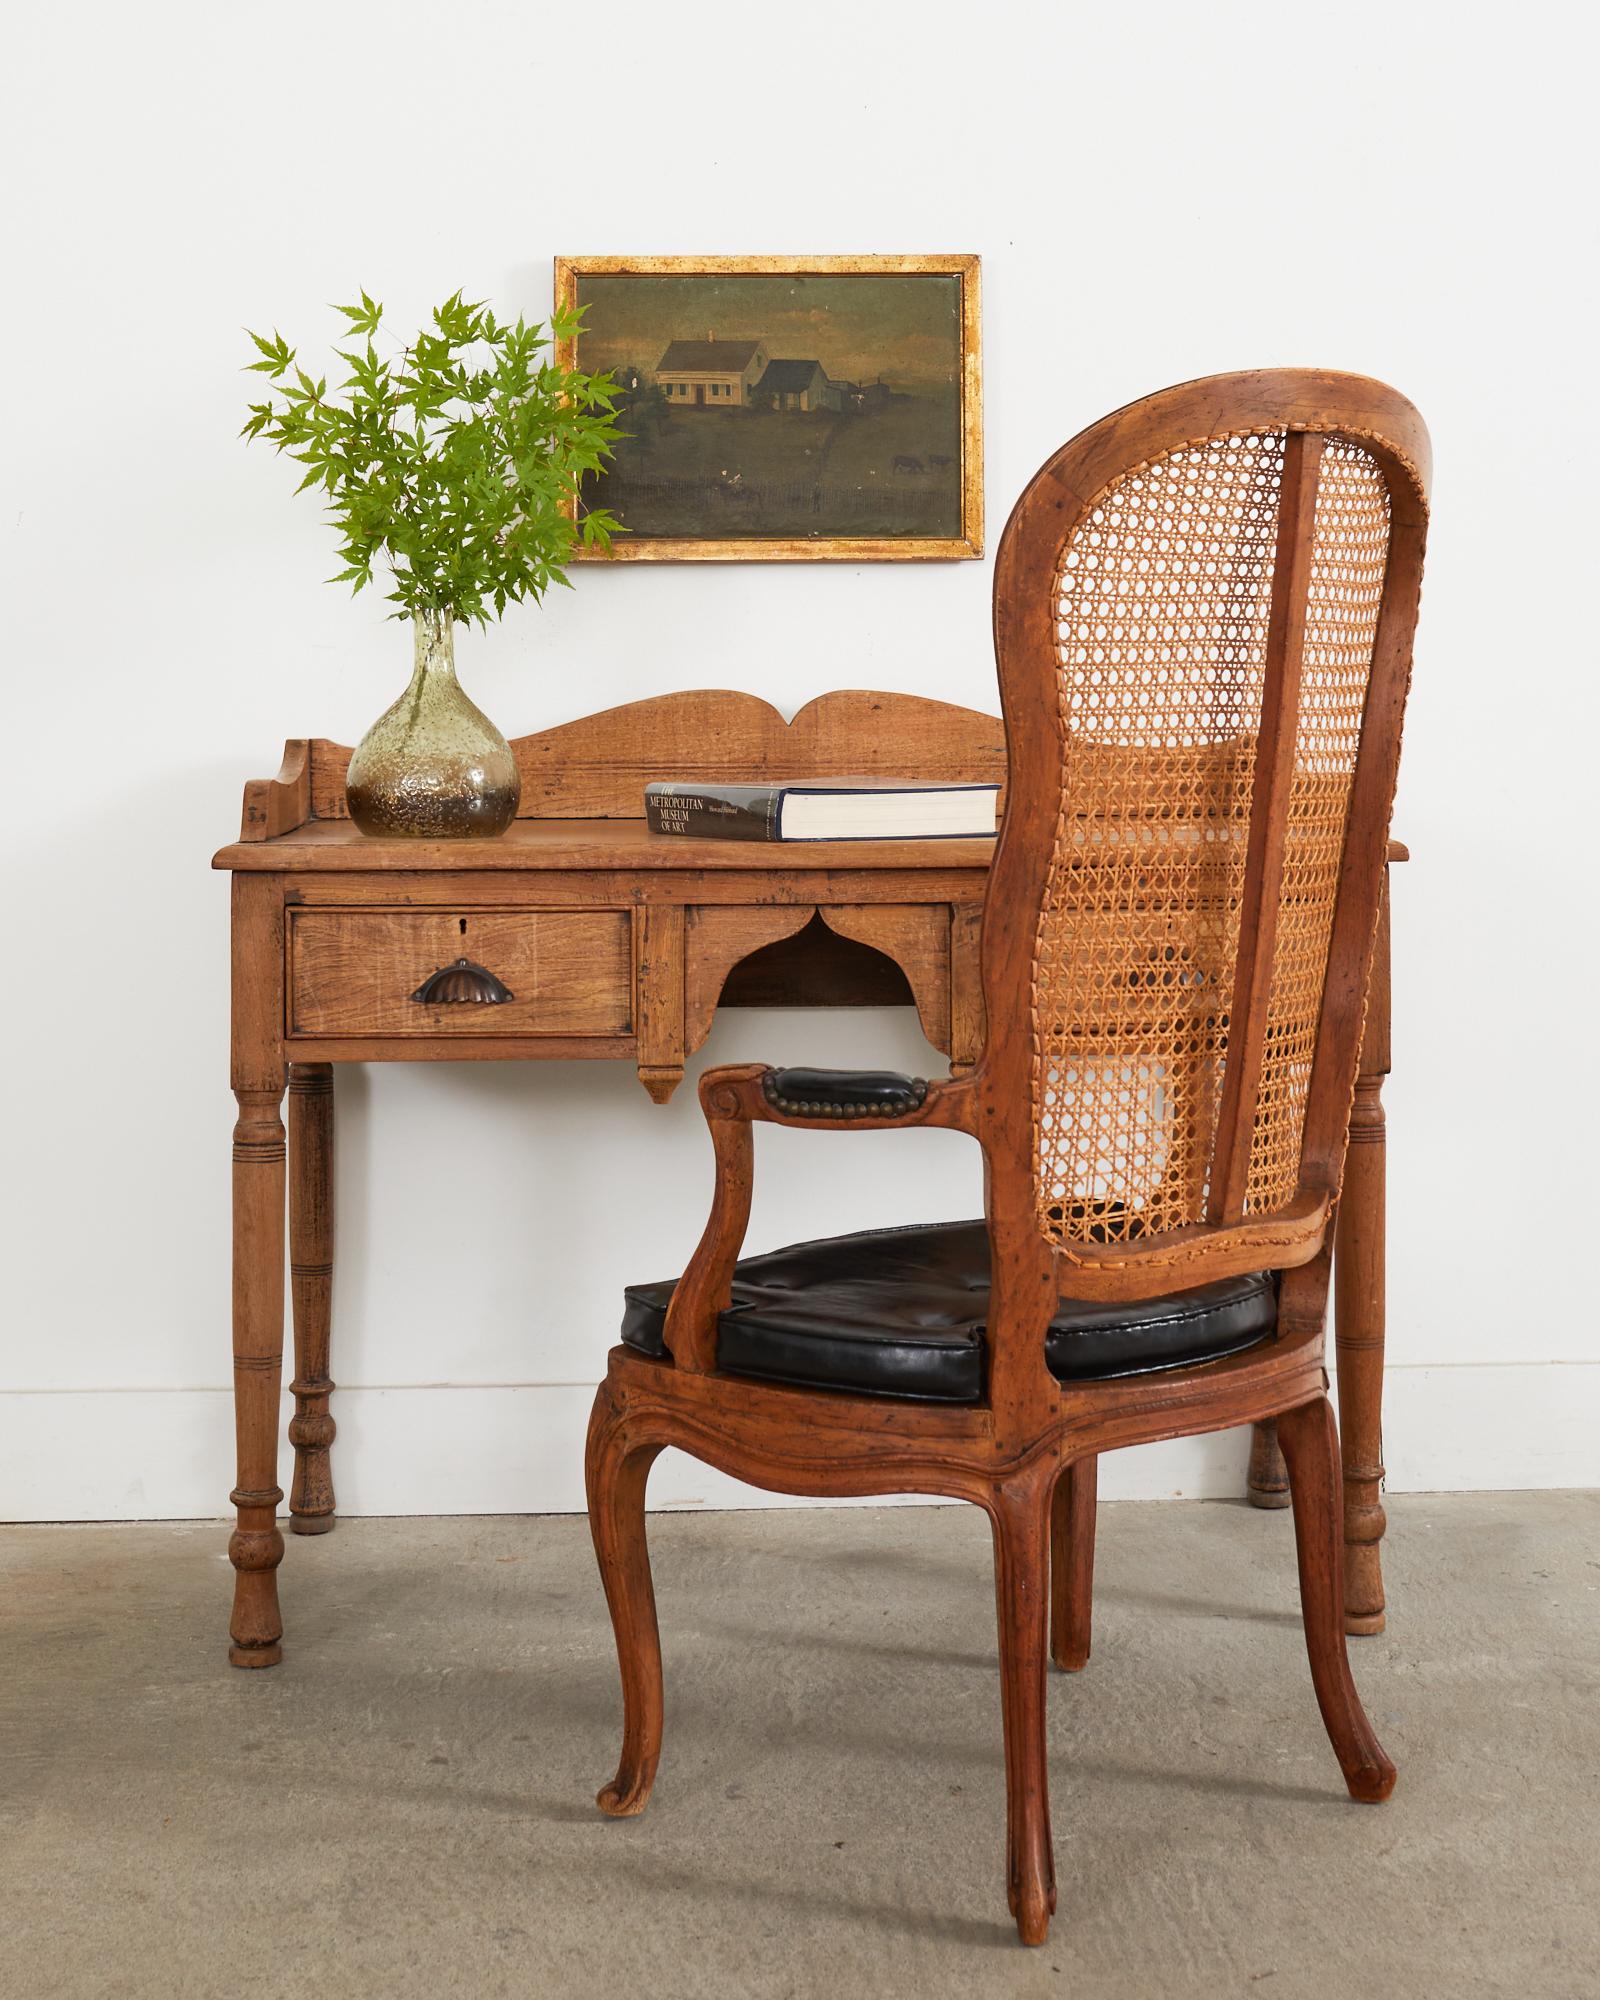 Distinctive 19th century French fauteuil armchair or hall chair featuring a rare high caned back. Beautifully crafted from walnut with a rich aged patina on the finish. The seat has a fitted seat cushion made from black naugahyde over a caned seat.